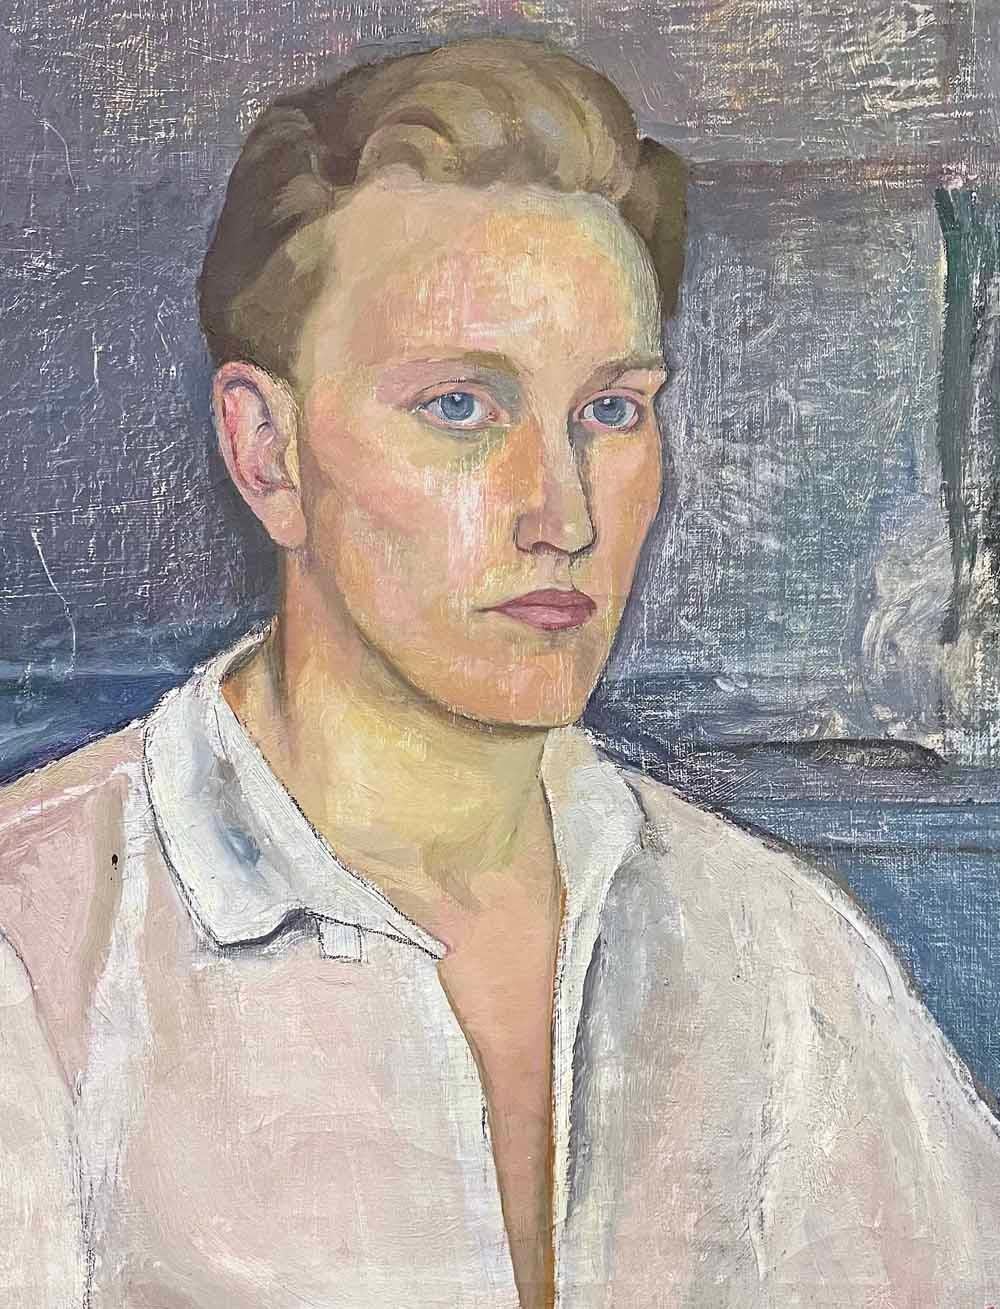 Beautifully painted in a quiet palette of blue, gray and warm skin tones, this portrait of a college student with blonde hair and fair complexion was made by Ernst Söderberg in 1920.  The artist painted on canvas, and then scratched away at the